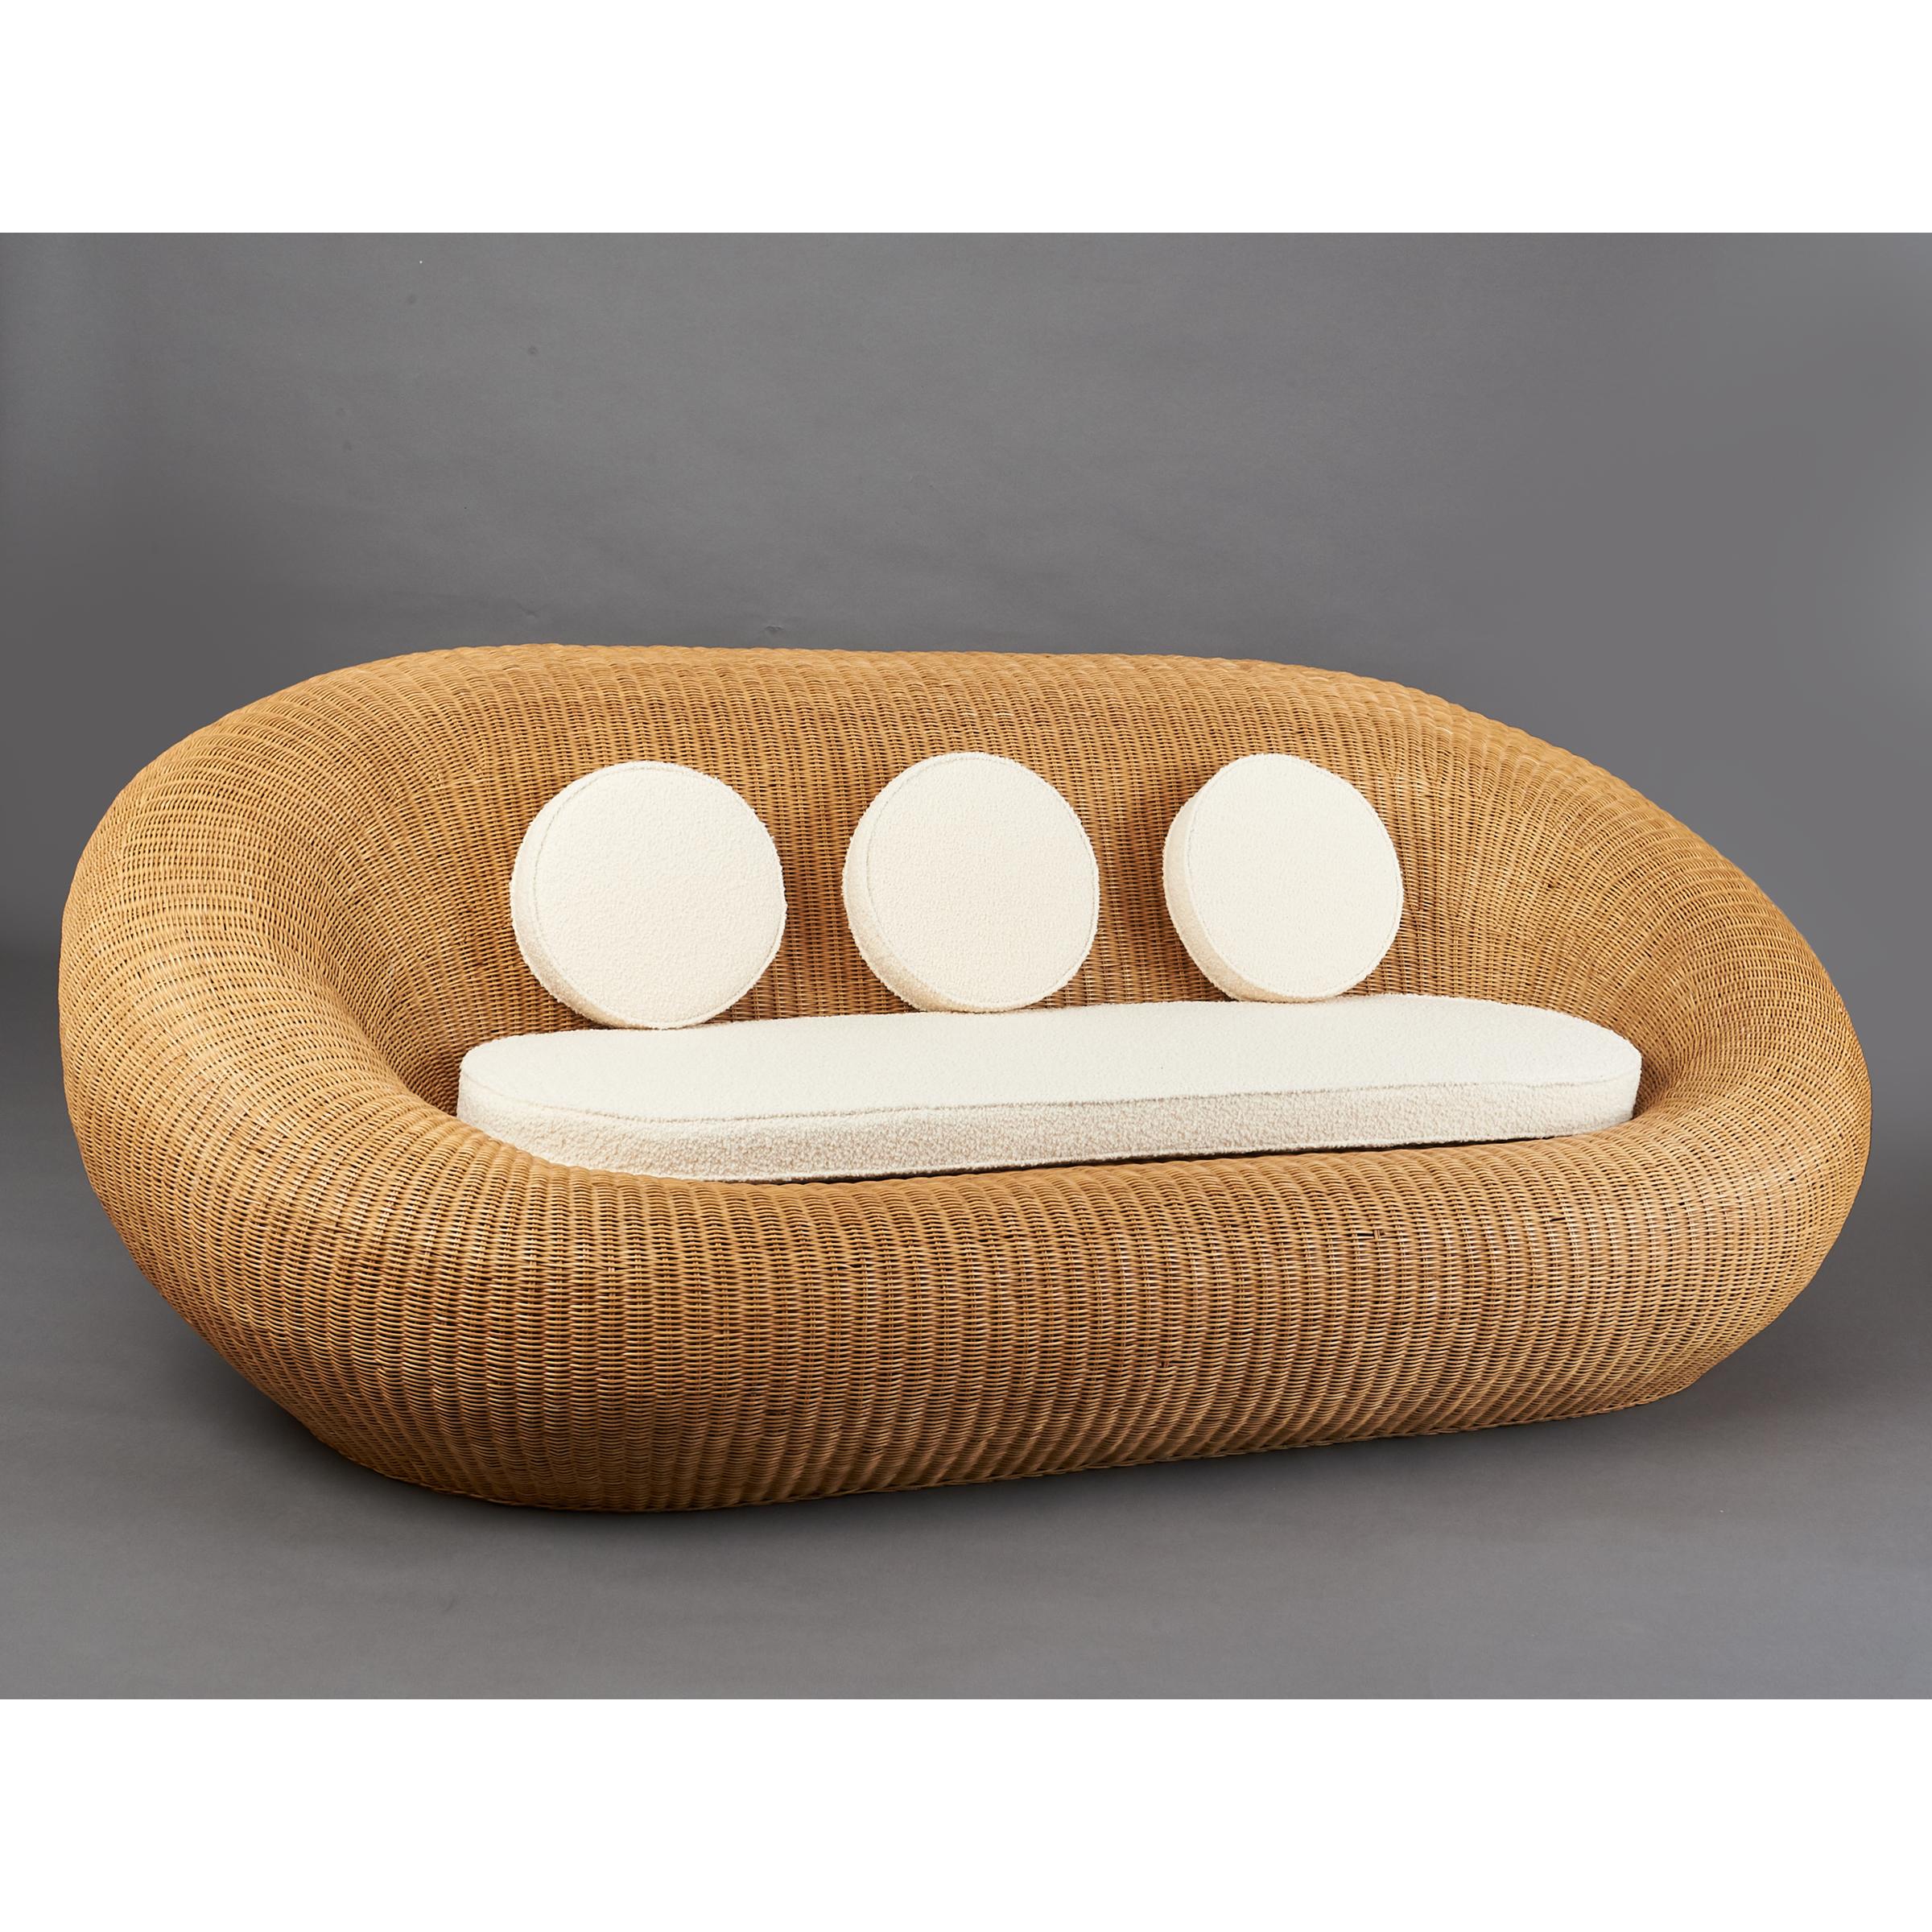 French Woven Rattan Oval Shaped Couch, ca. 1999 For Sale